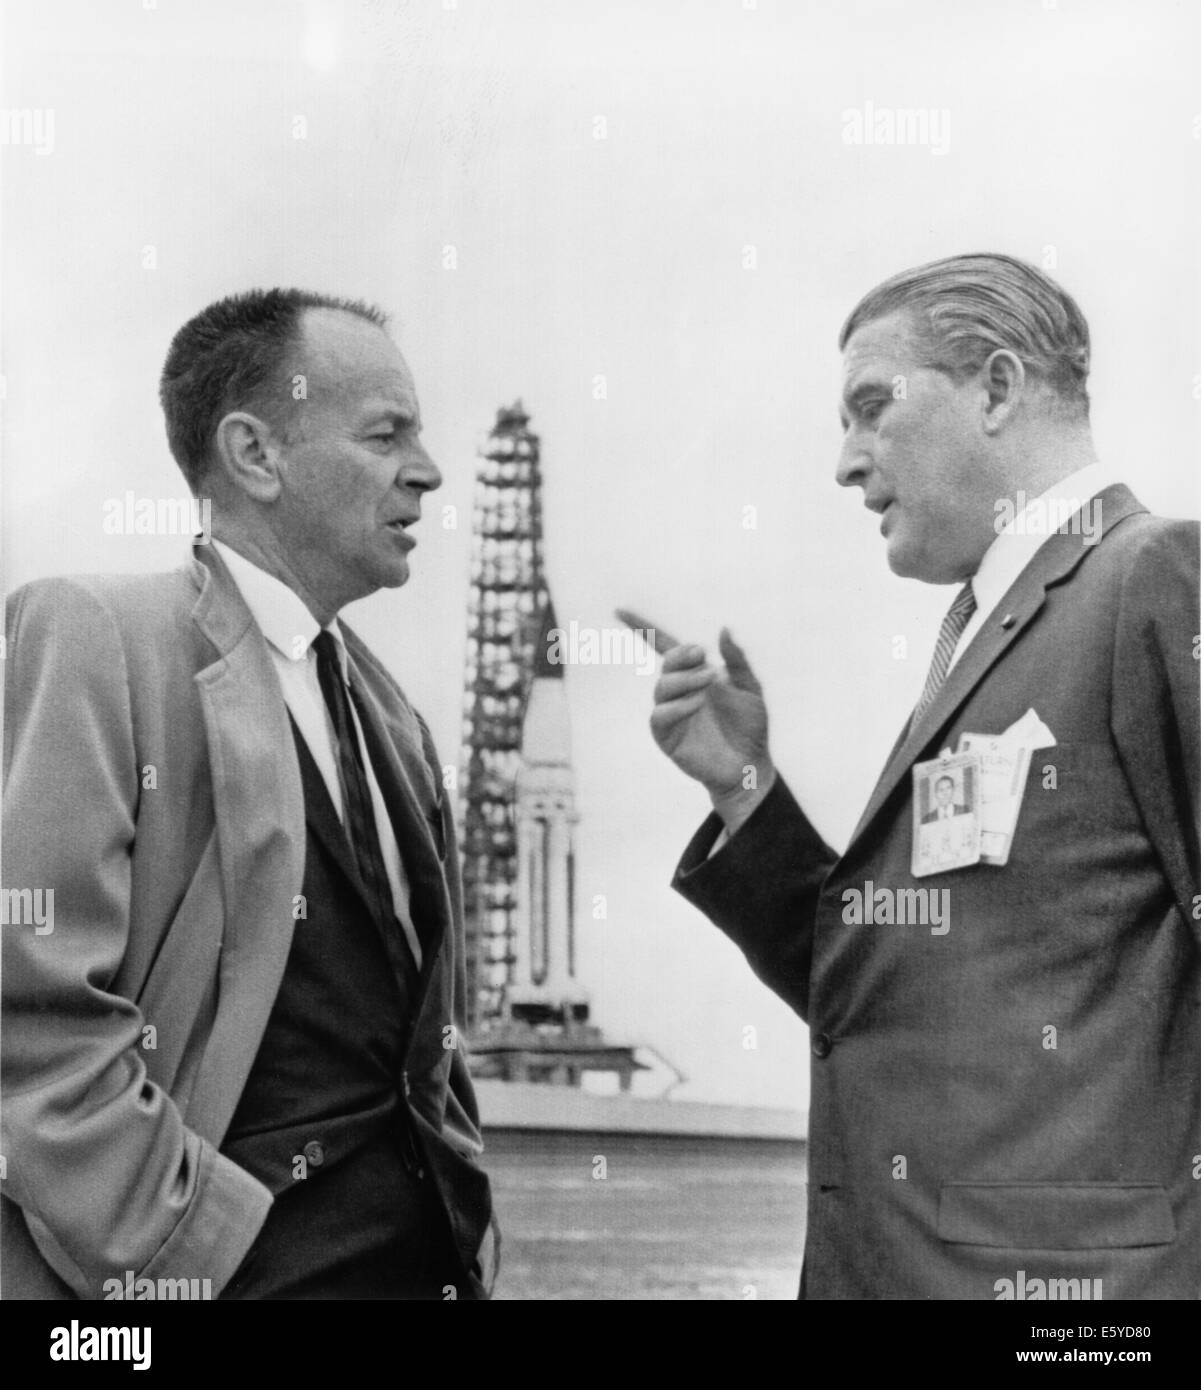 Dr. Wernher Von Braun and Harrison A. Storm Discussing SA-5 Saturn Launch Vehicle, Cape Kennedy, Florida, USA, 1964 Stock Photo